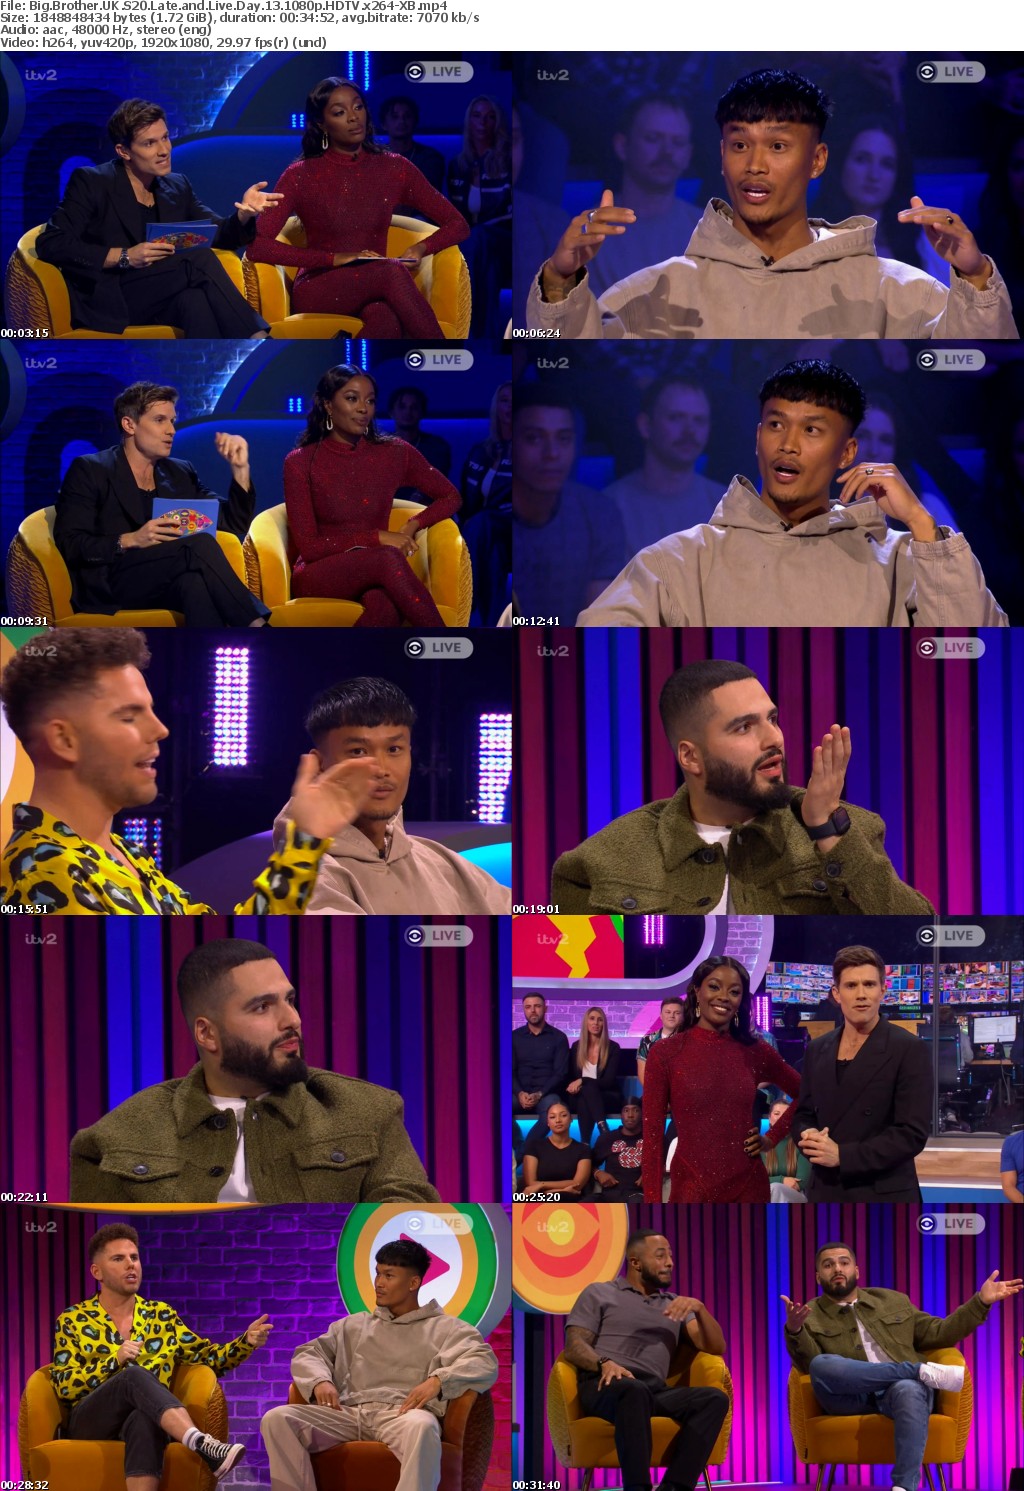 Big Brother UK S20 Late and Live Day 13 1080p HDTV x264-XB